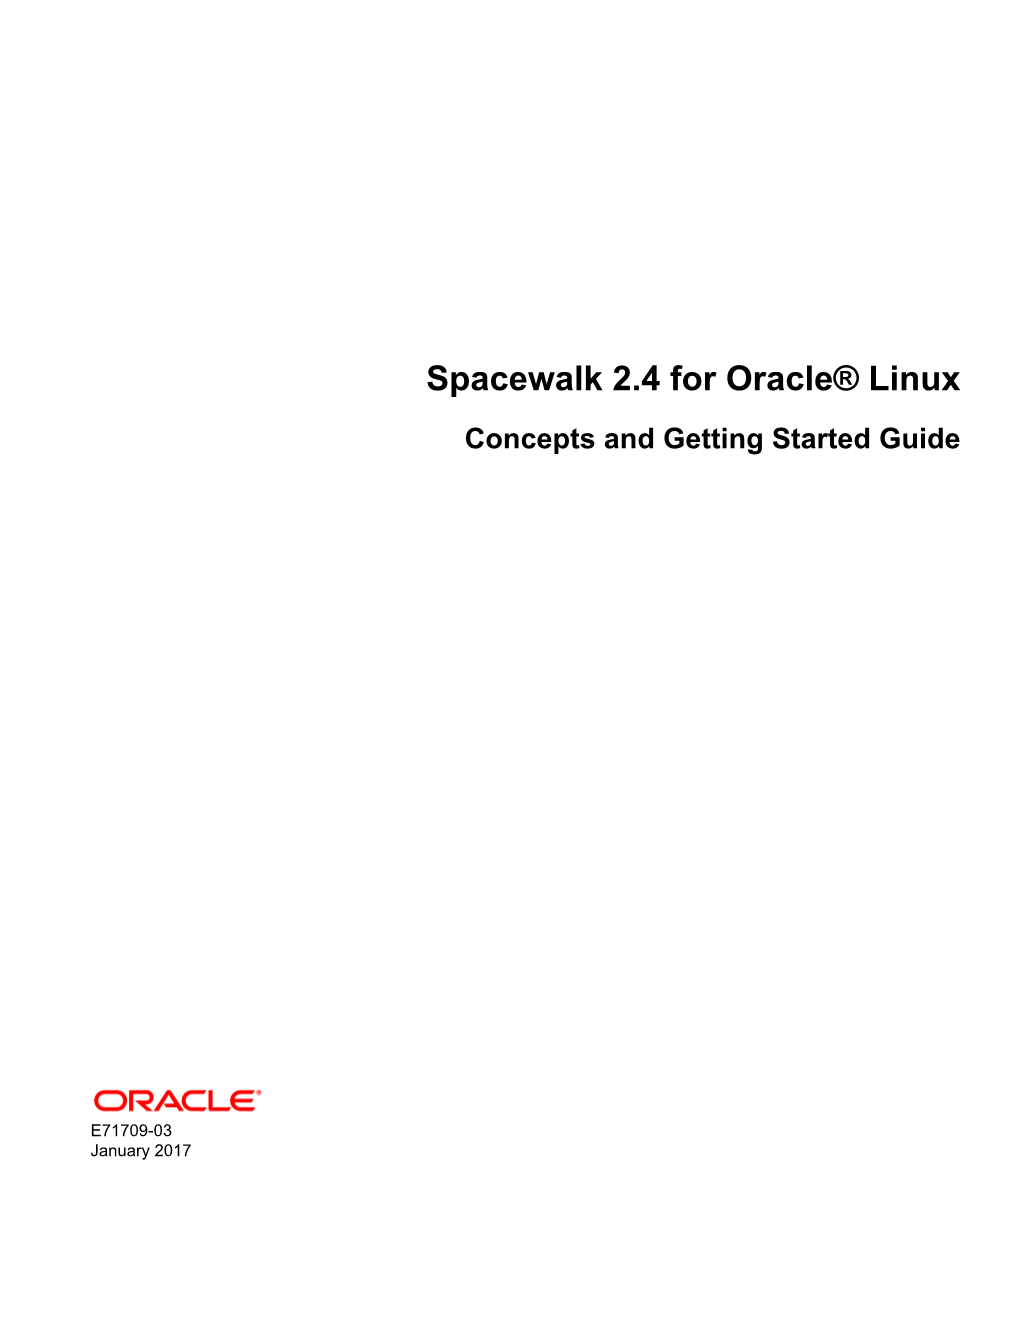 Spacewalk 2.4 for Oracle® Linux Concepts and Getting Started Guide